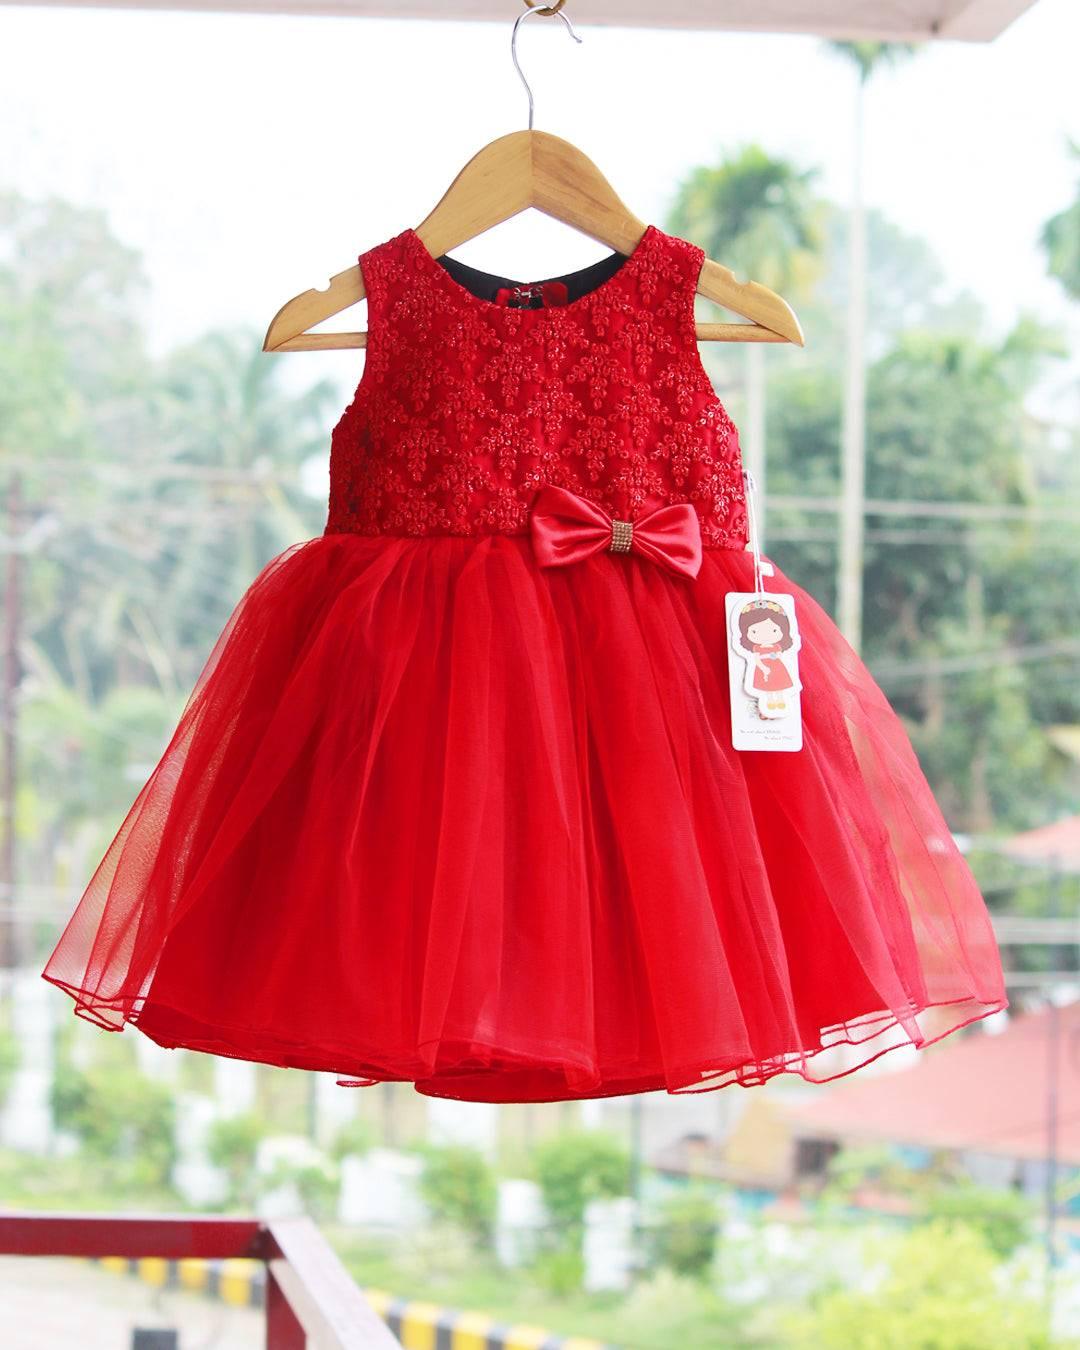 Red Colour Premium Thread Embroidery Frock.
Fabric: Bright Red mono net with premium same colour threadwork detailing on the yoke portion  Beautifully designed outfit for Baby girls with smooth lining for com